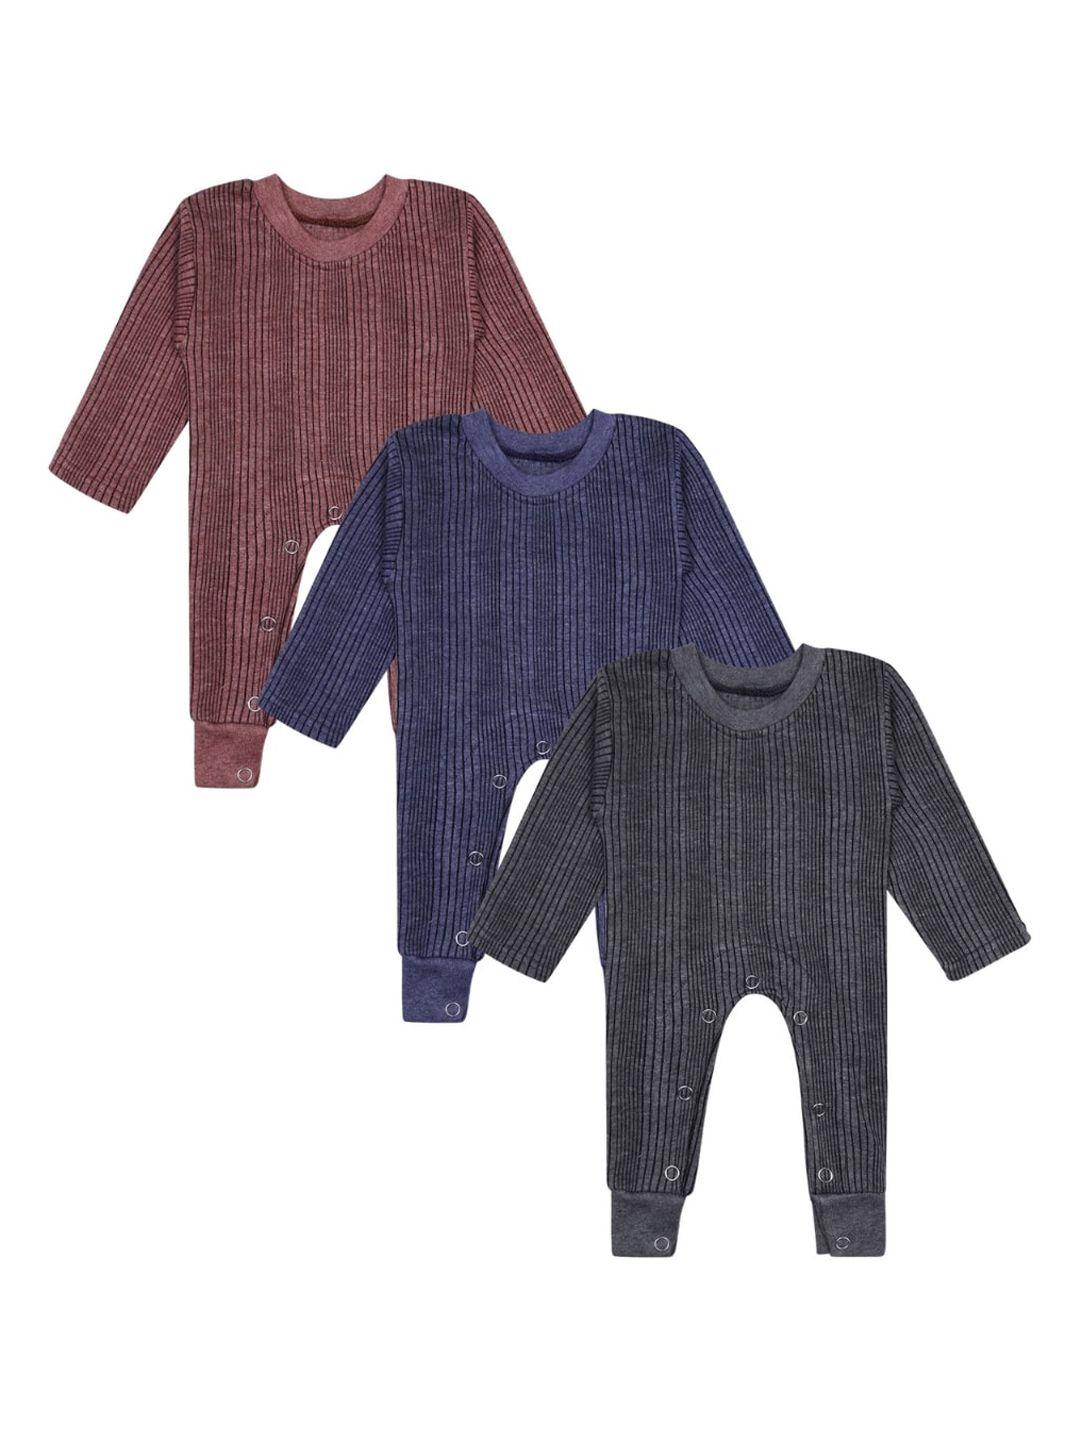 superminis infants set of 3 thermal romper